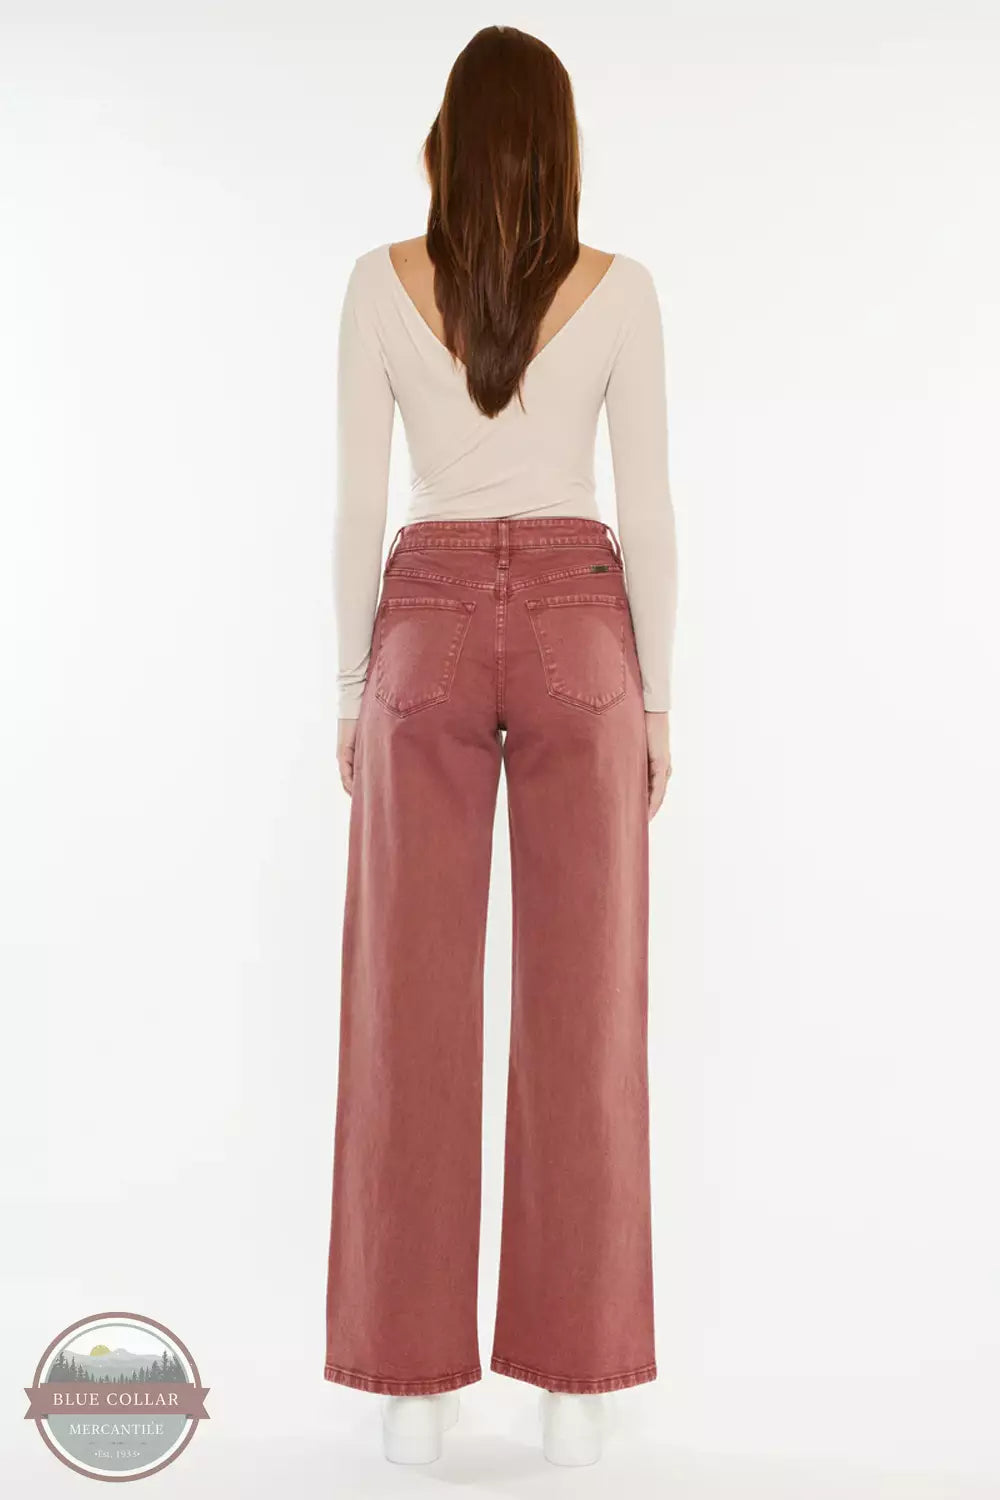 Kancan KC7456RT Aveline High Rise Wide Leg Jeans in Rust Wash Back View